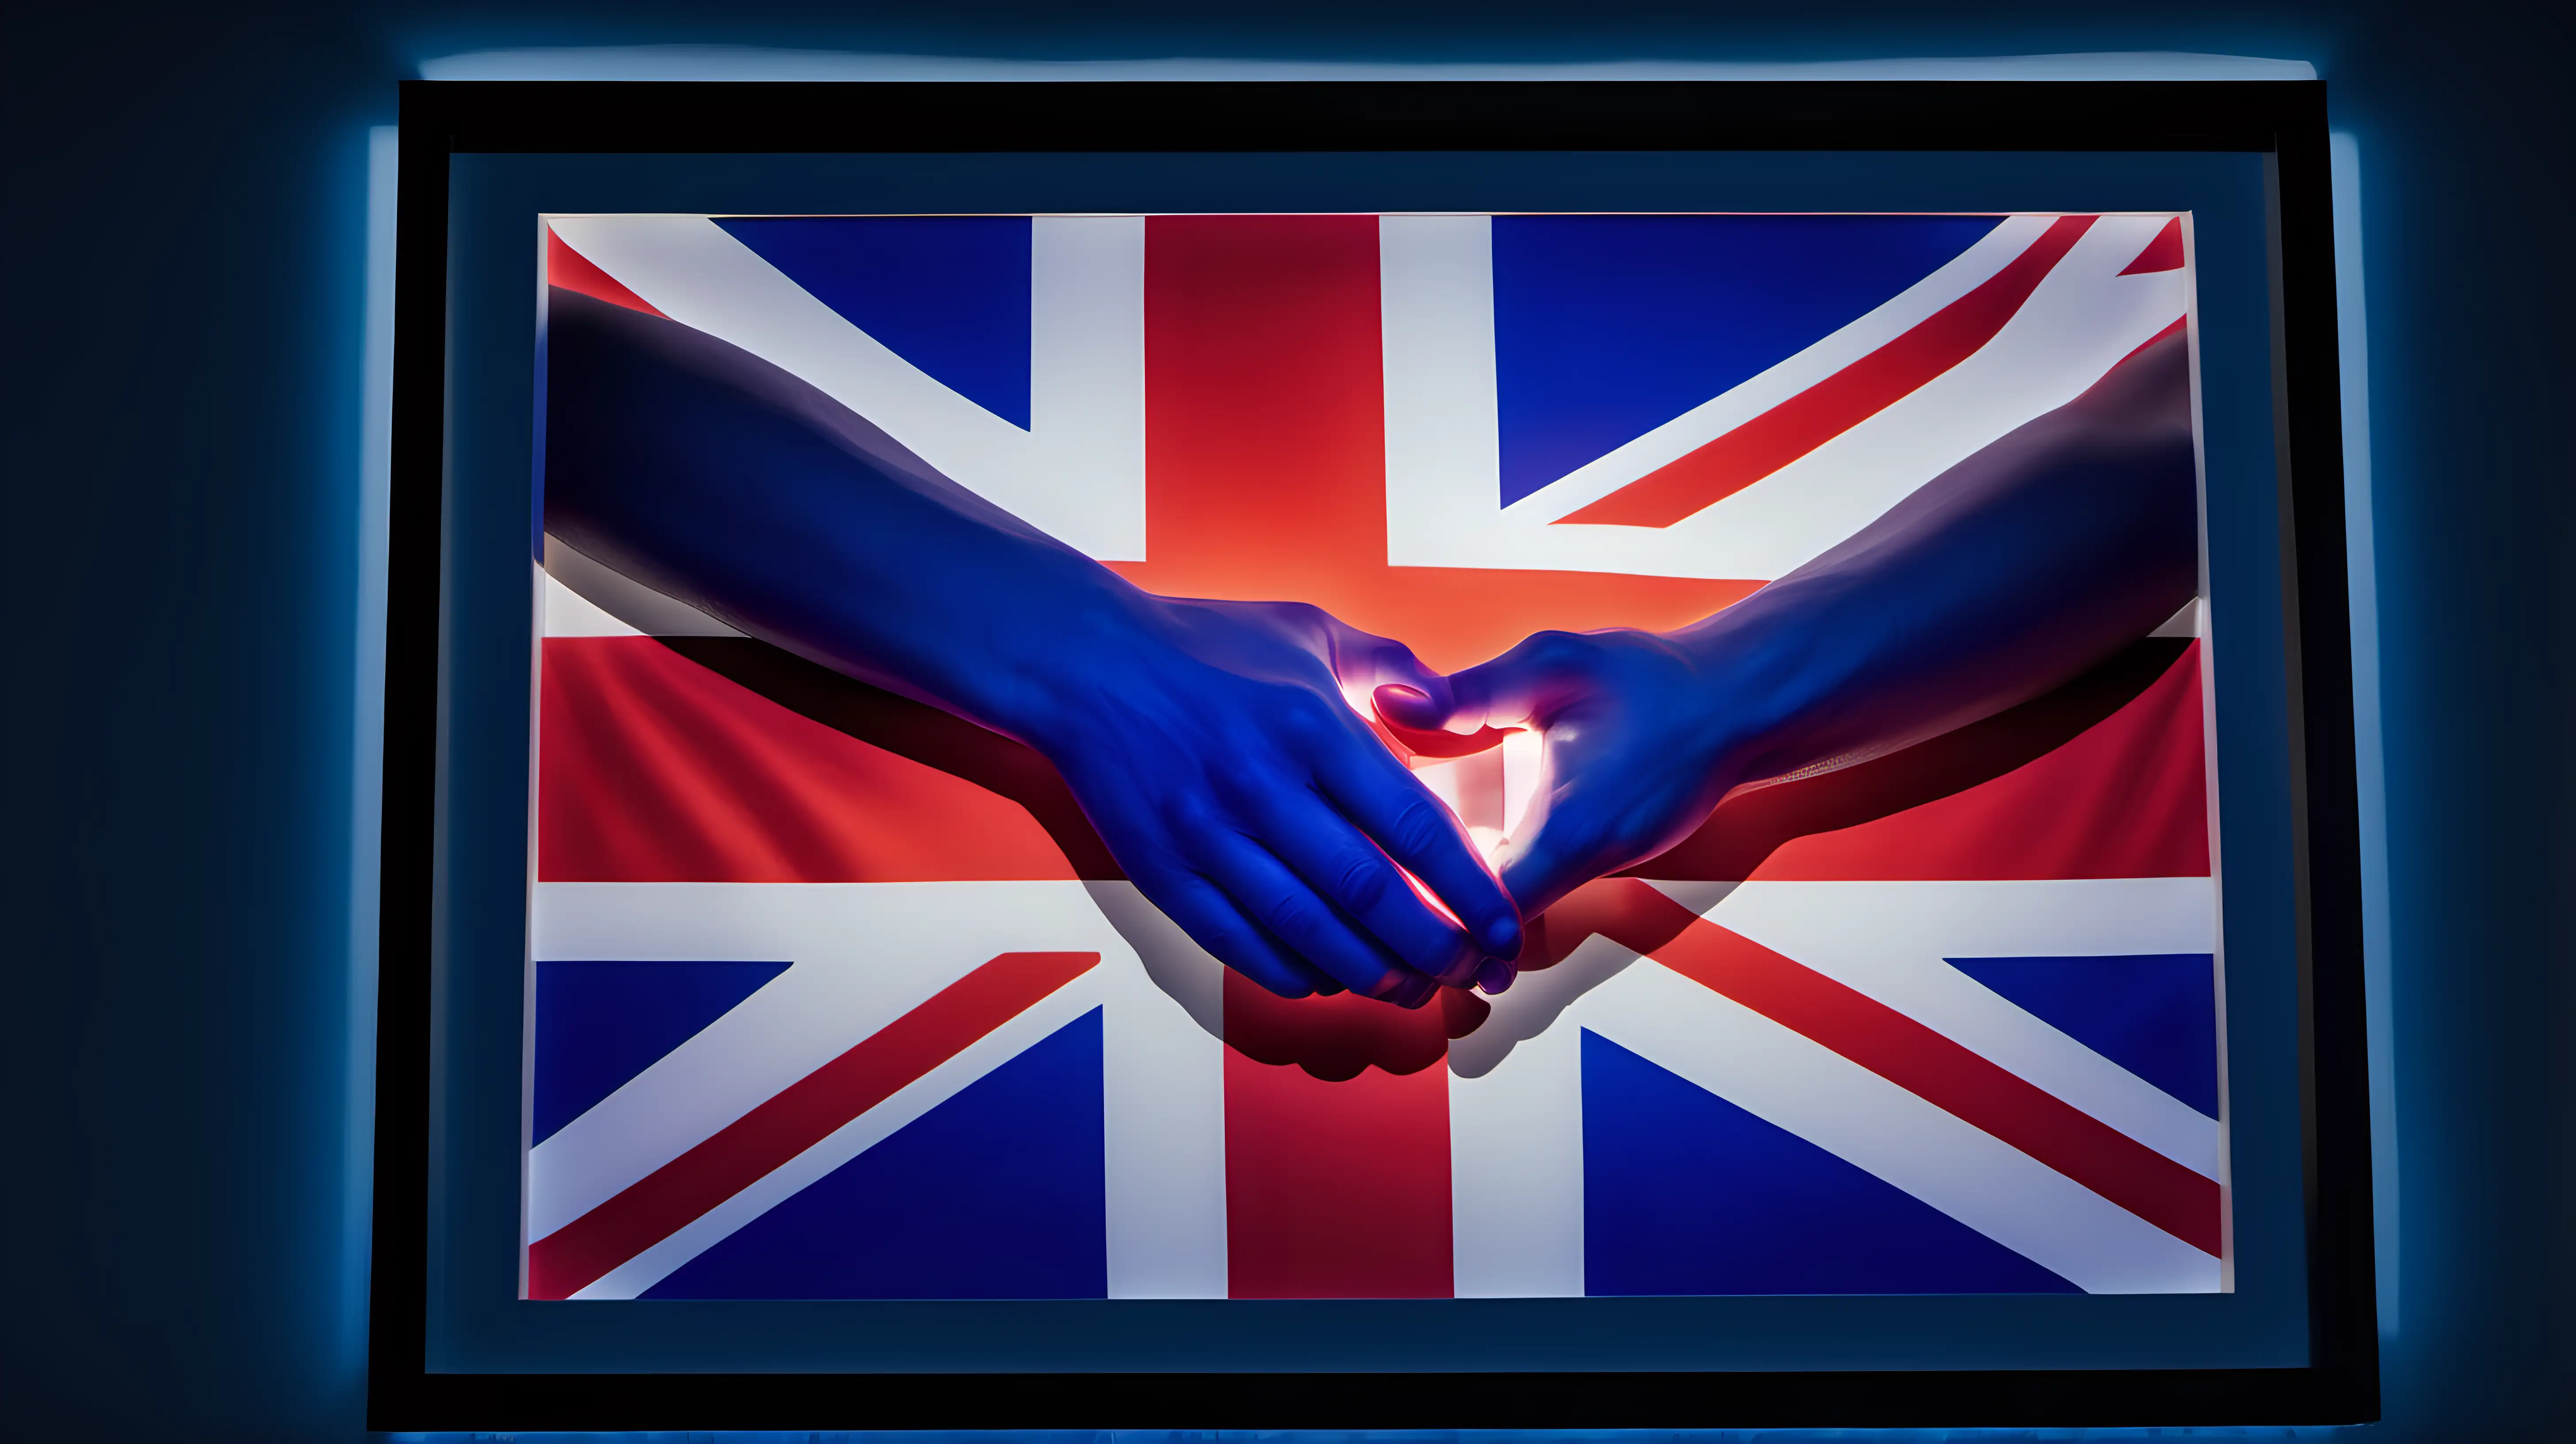 "Glowing with allegiance: Frame a close-up of a person's hands clasping a luminous United Kingdom flag, the vibrant colors symbolizing their deep love for their country."